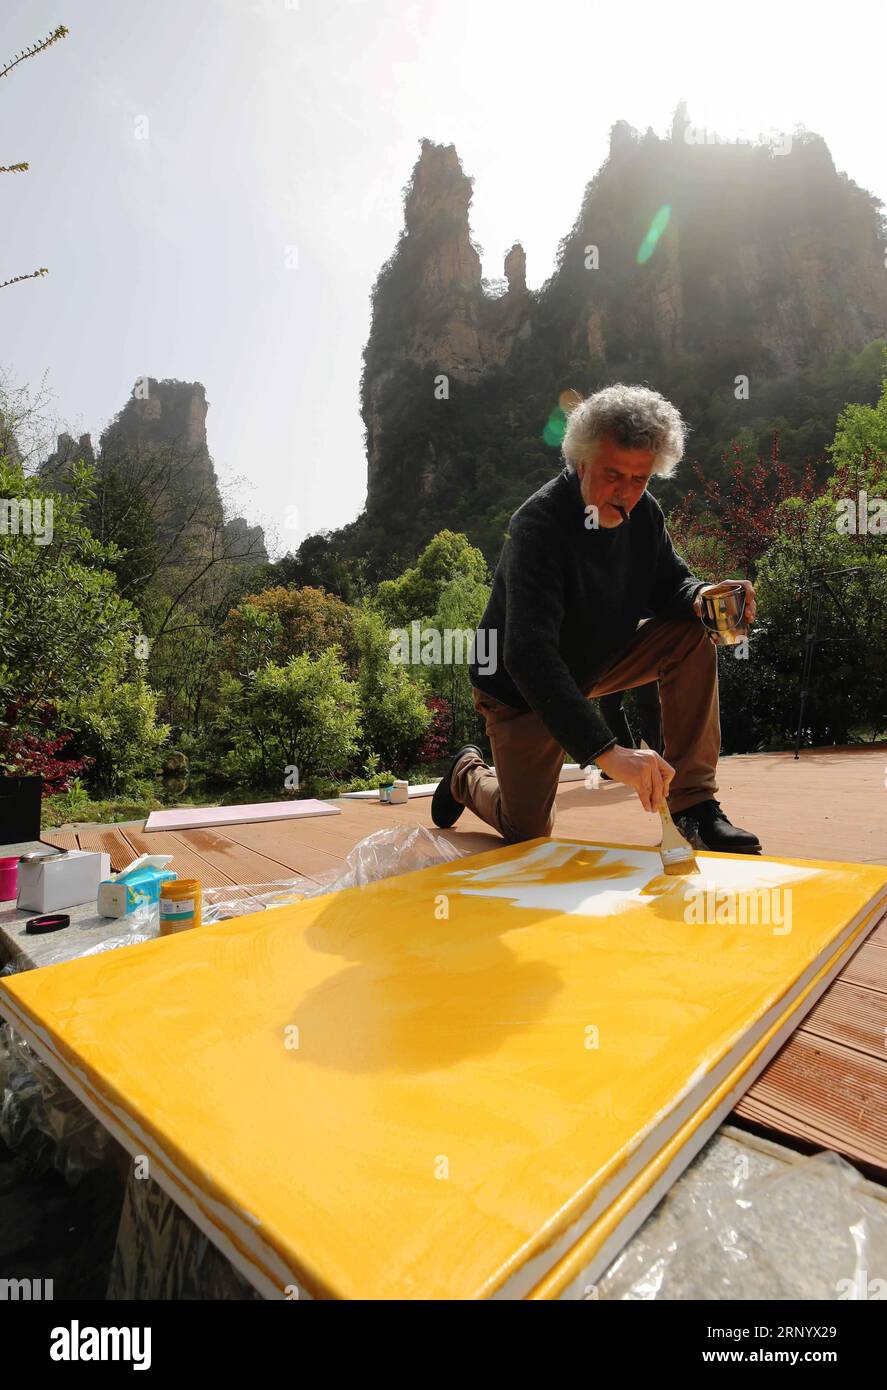 (180407) -- ZHANGJIAJIE, April 7, 2018 -- Francesco Roviello from Italy paints at Zhangjiajie UNESCO Global Geopark at Wulingyuan District of Zhangjiajie City, central China s Hunan Province, April 6, 2018. About 21 artists coming from Italy took part in a cultural event at the geopark which is known for its quartzose sandstone landform. This geopark is one of the geoparks in China that have already been chosen by UNESCO on its World Network of Geoparks. )(wsw) CHINA-HUNAN-ZHANGJIAJIE GEOPARK-ITALIAN ARTISTS (CN*) WuxYongbing PUBLICATIONxNOTxINxCHN Stock Photo